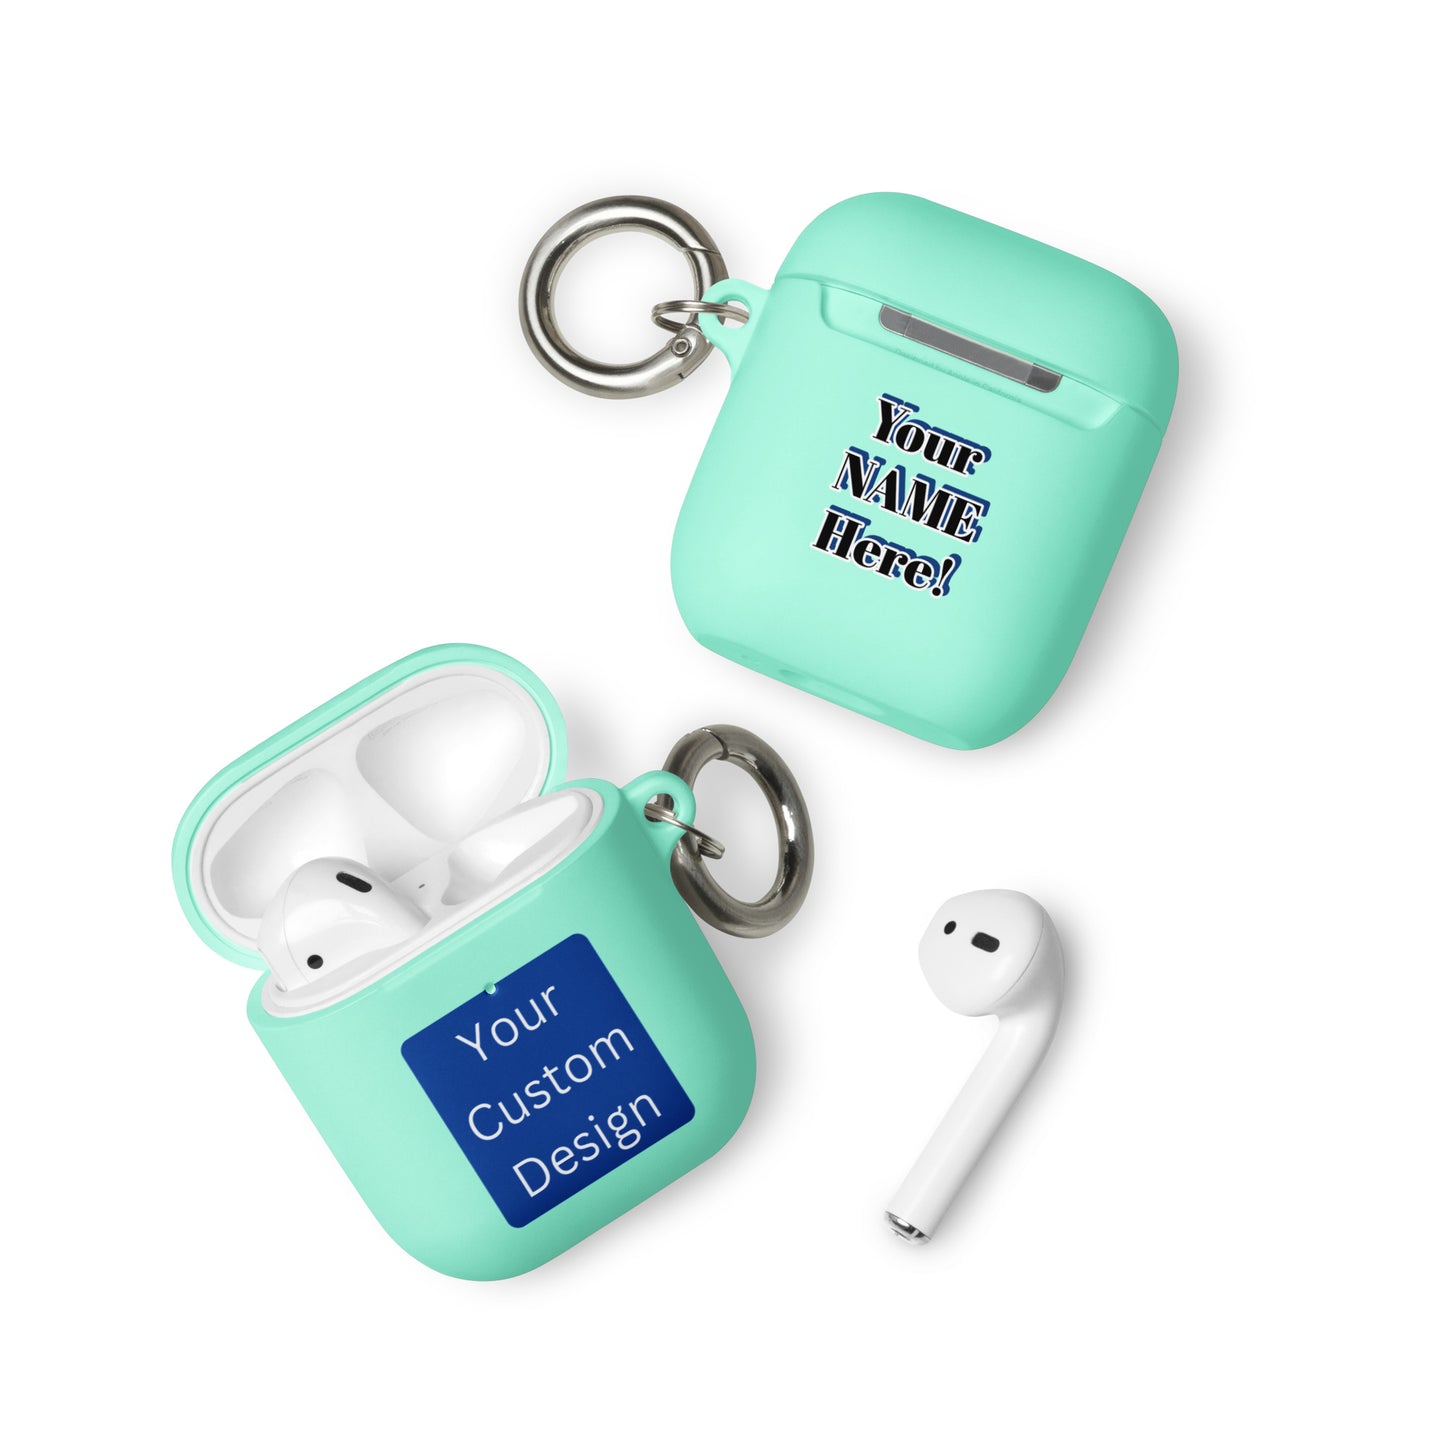 Customizable / Personalized AirPods case